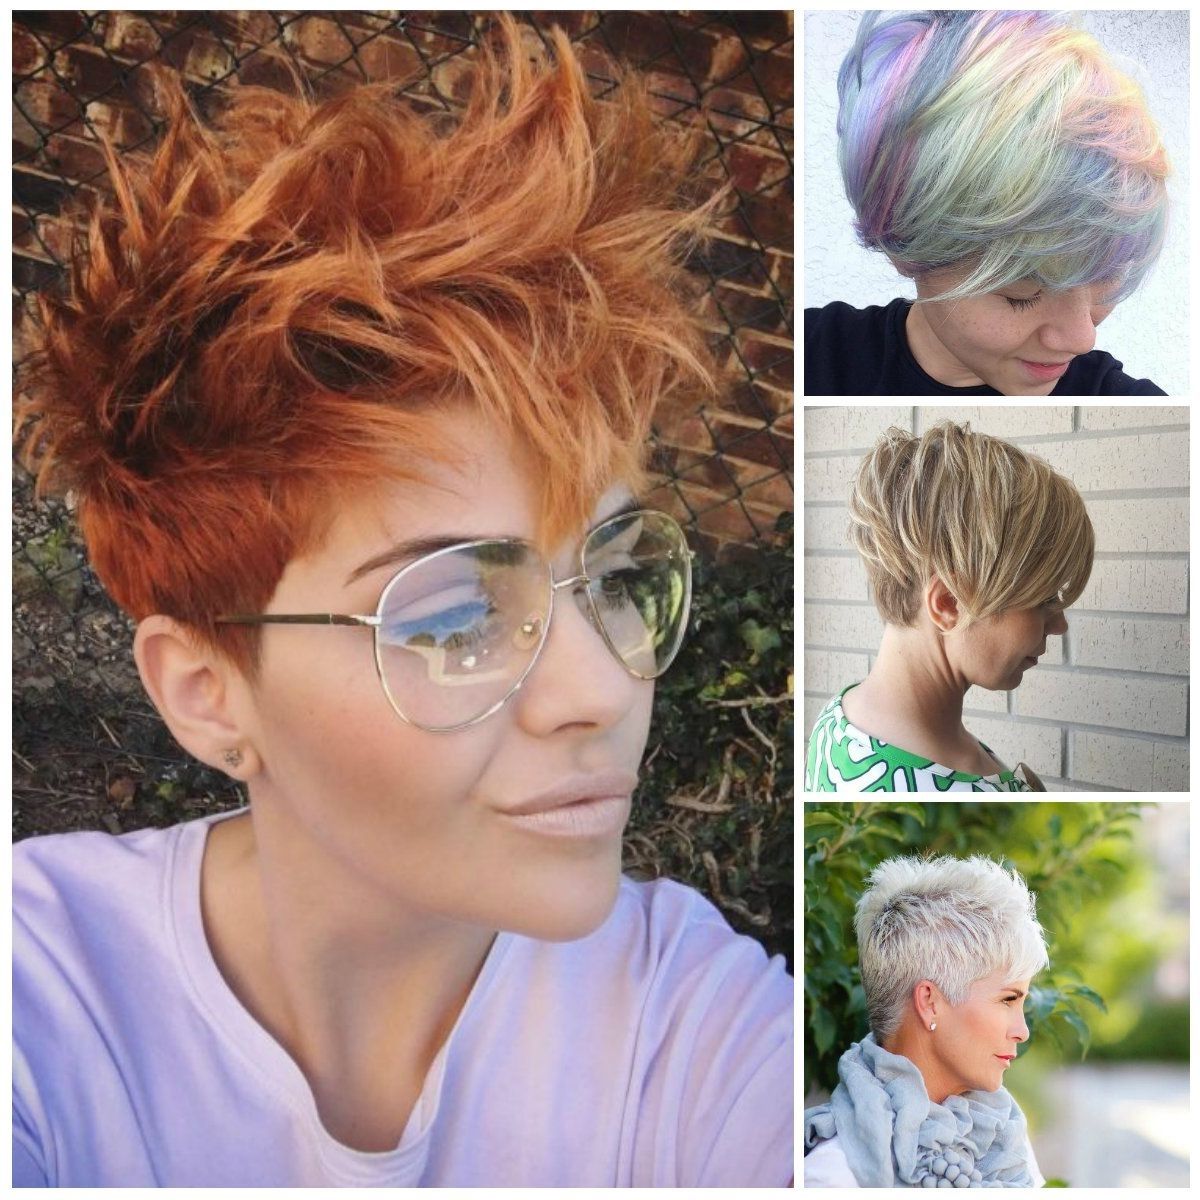 And Stylish Pixie Haircut Ideas For A Bold Statement – Simple Intended For Newest Stylish Pixie Hairstyles (View 9 of 15)